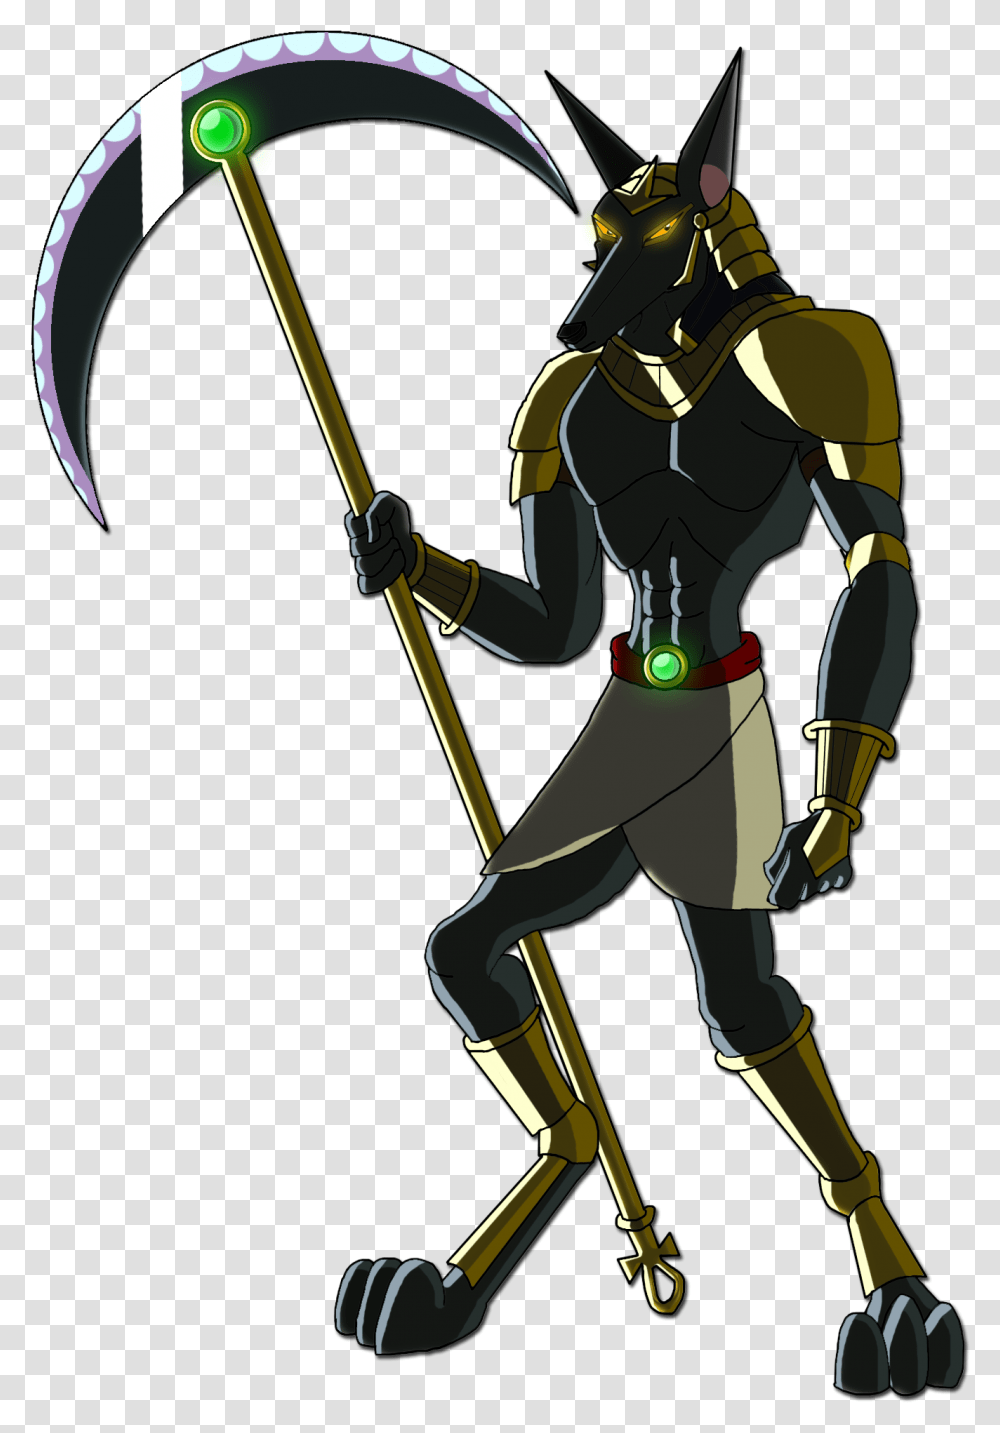 Seth Egyptian God Download Anubis The Egyptian God Weapon, Bow, Ninja, Knight, Costume Transparent Png